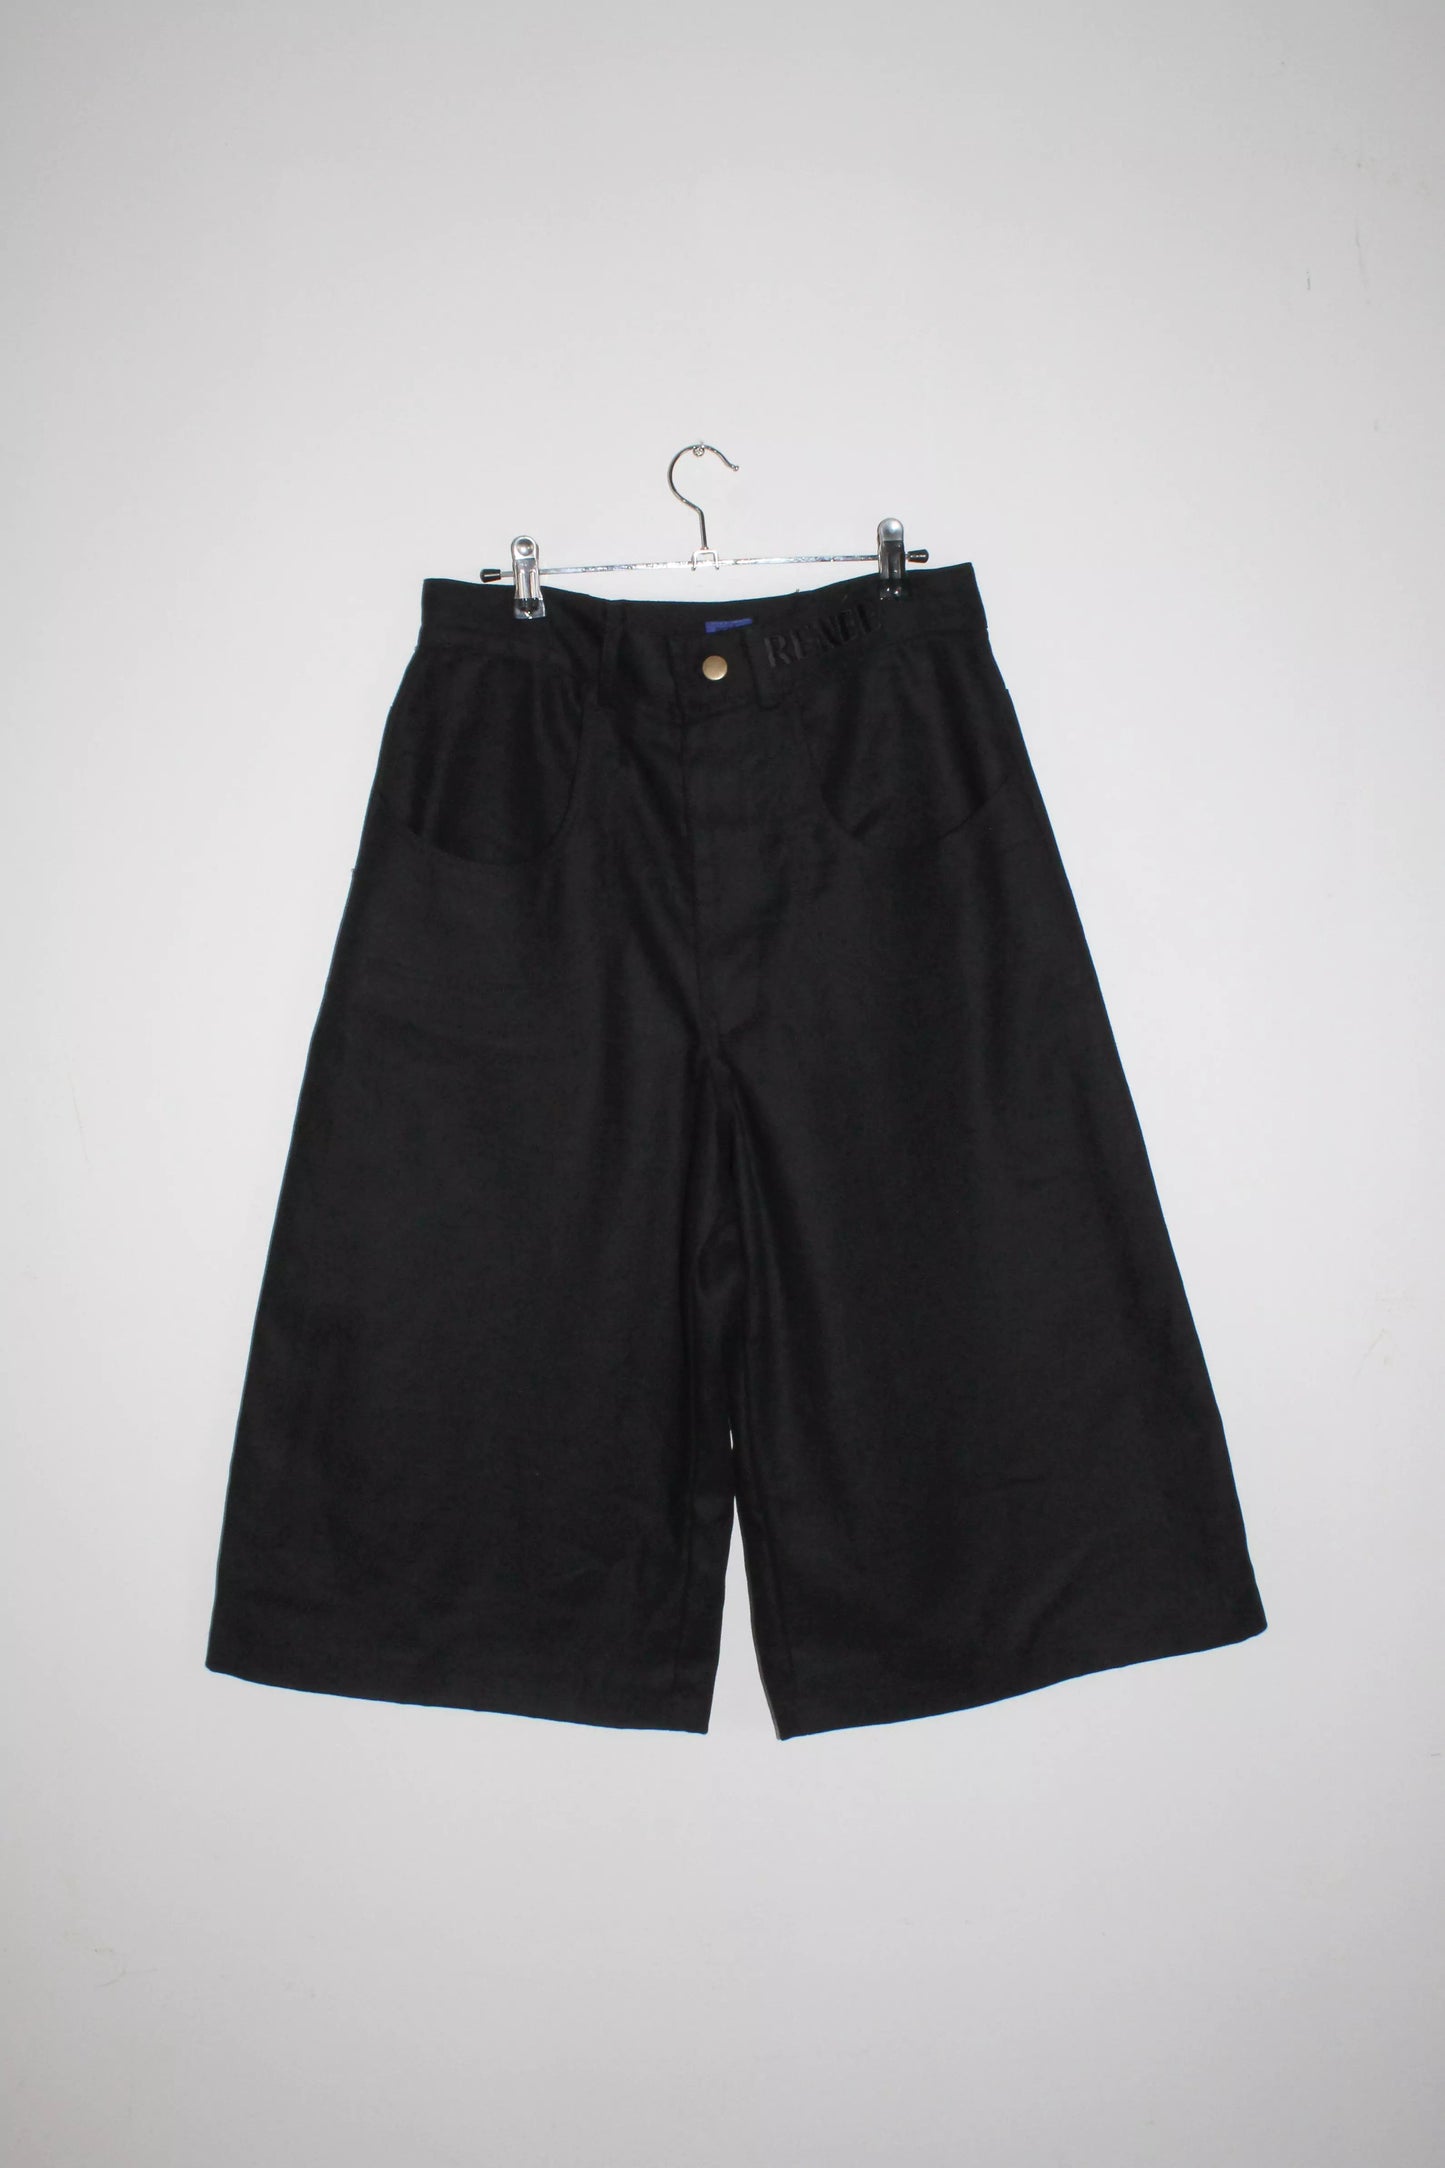 Front view lightweight long black denim shorts with removable screw buttons. Has fitted waist and 90s vintage details